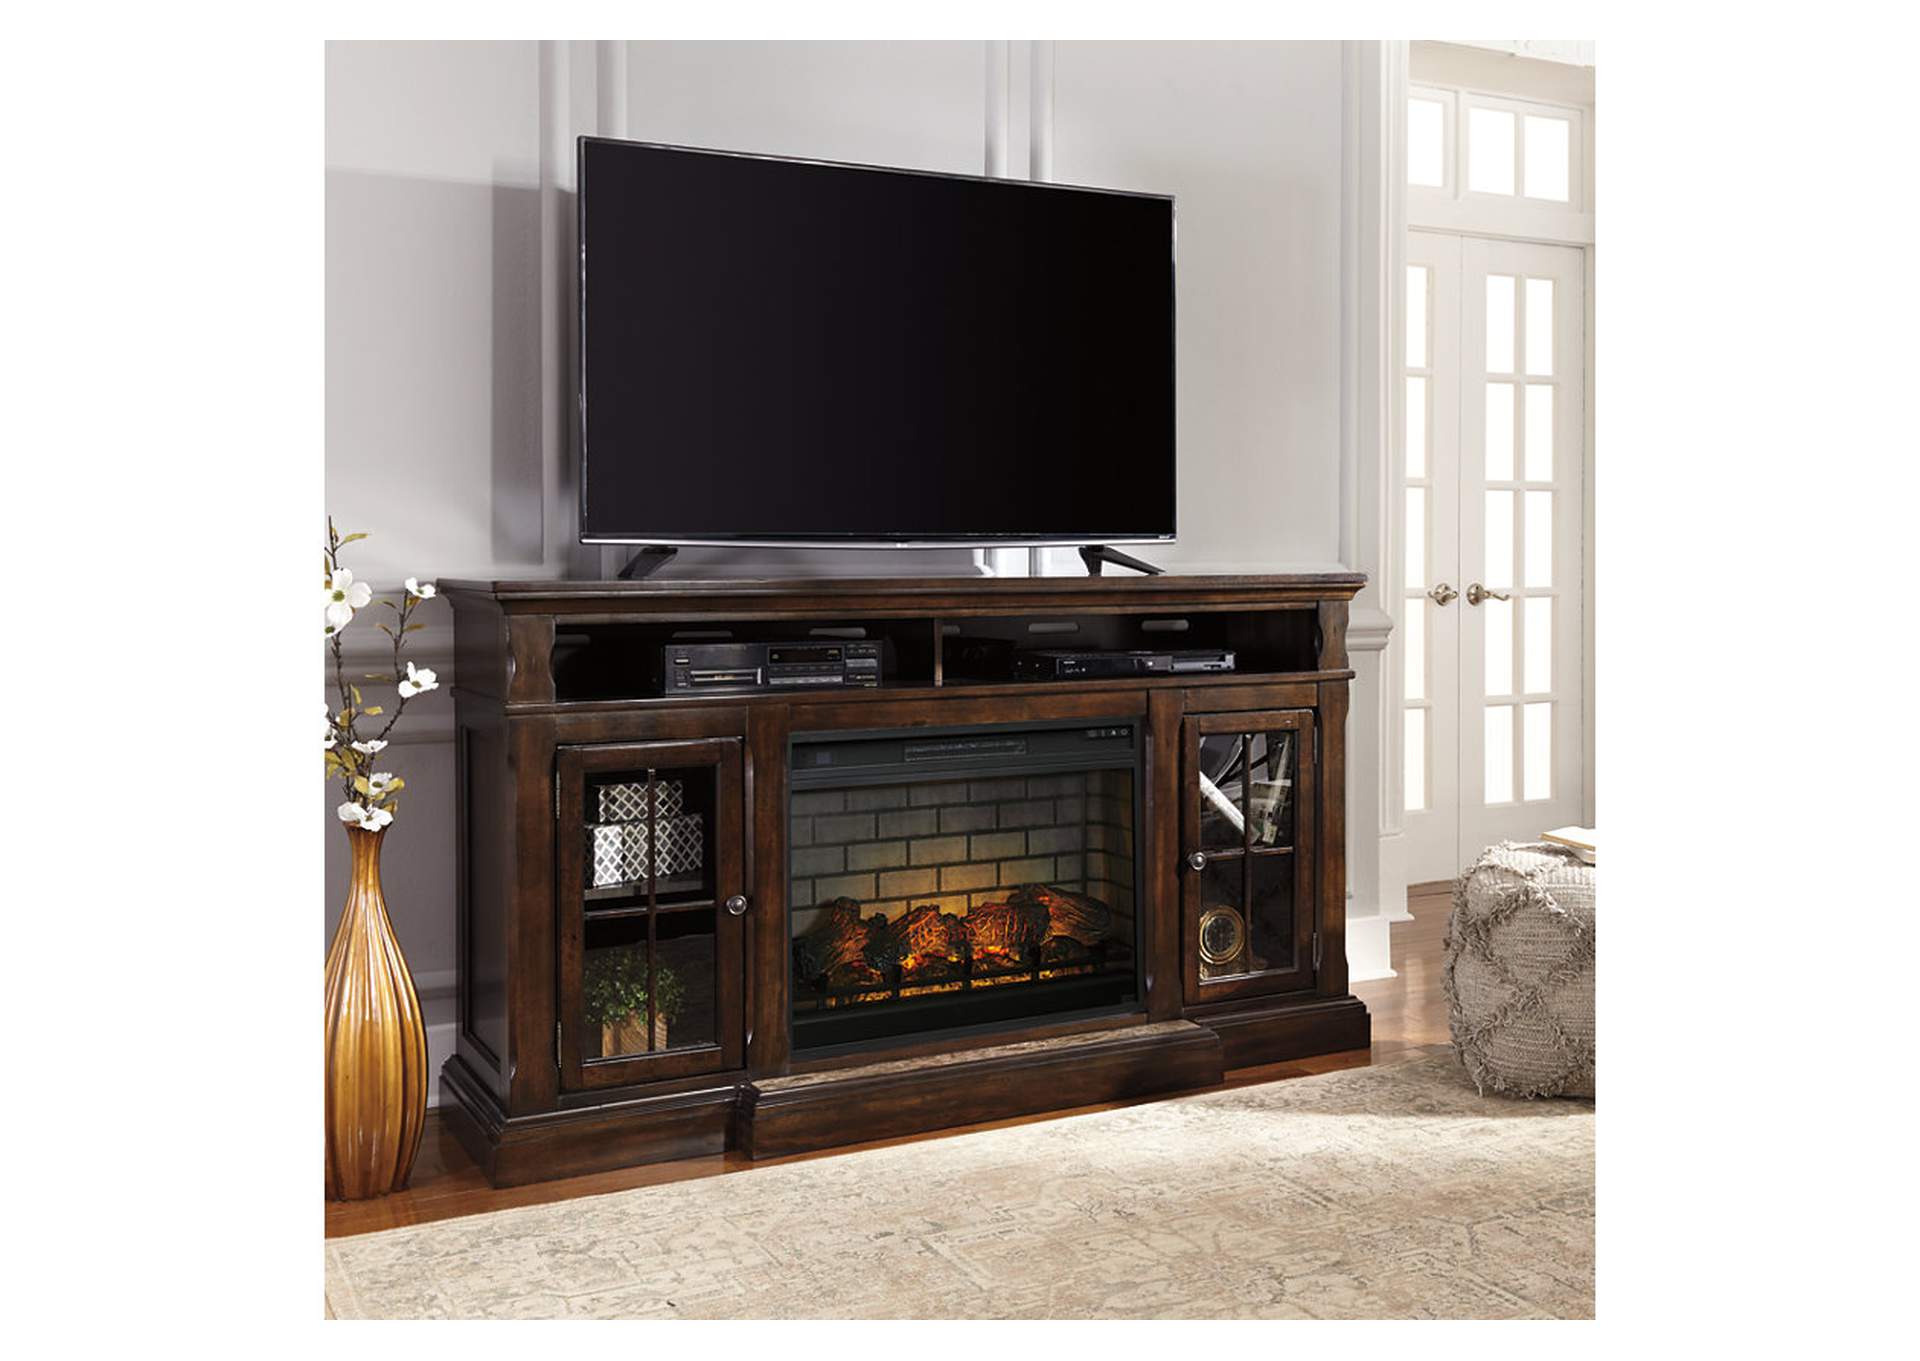 Roddinton 72" TV Stand with Electric Fireplace,Signature Design By Ashley